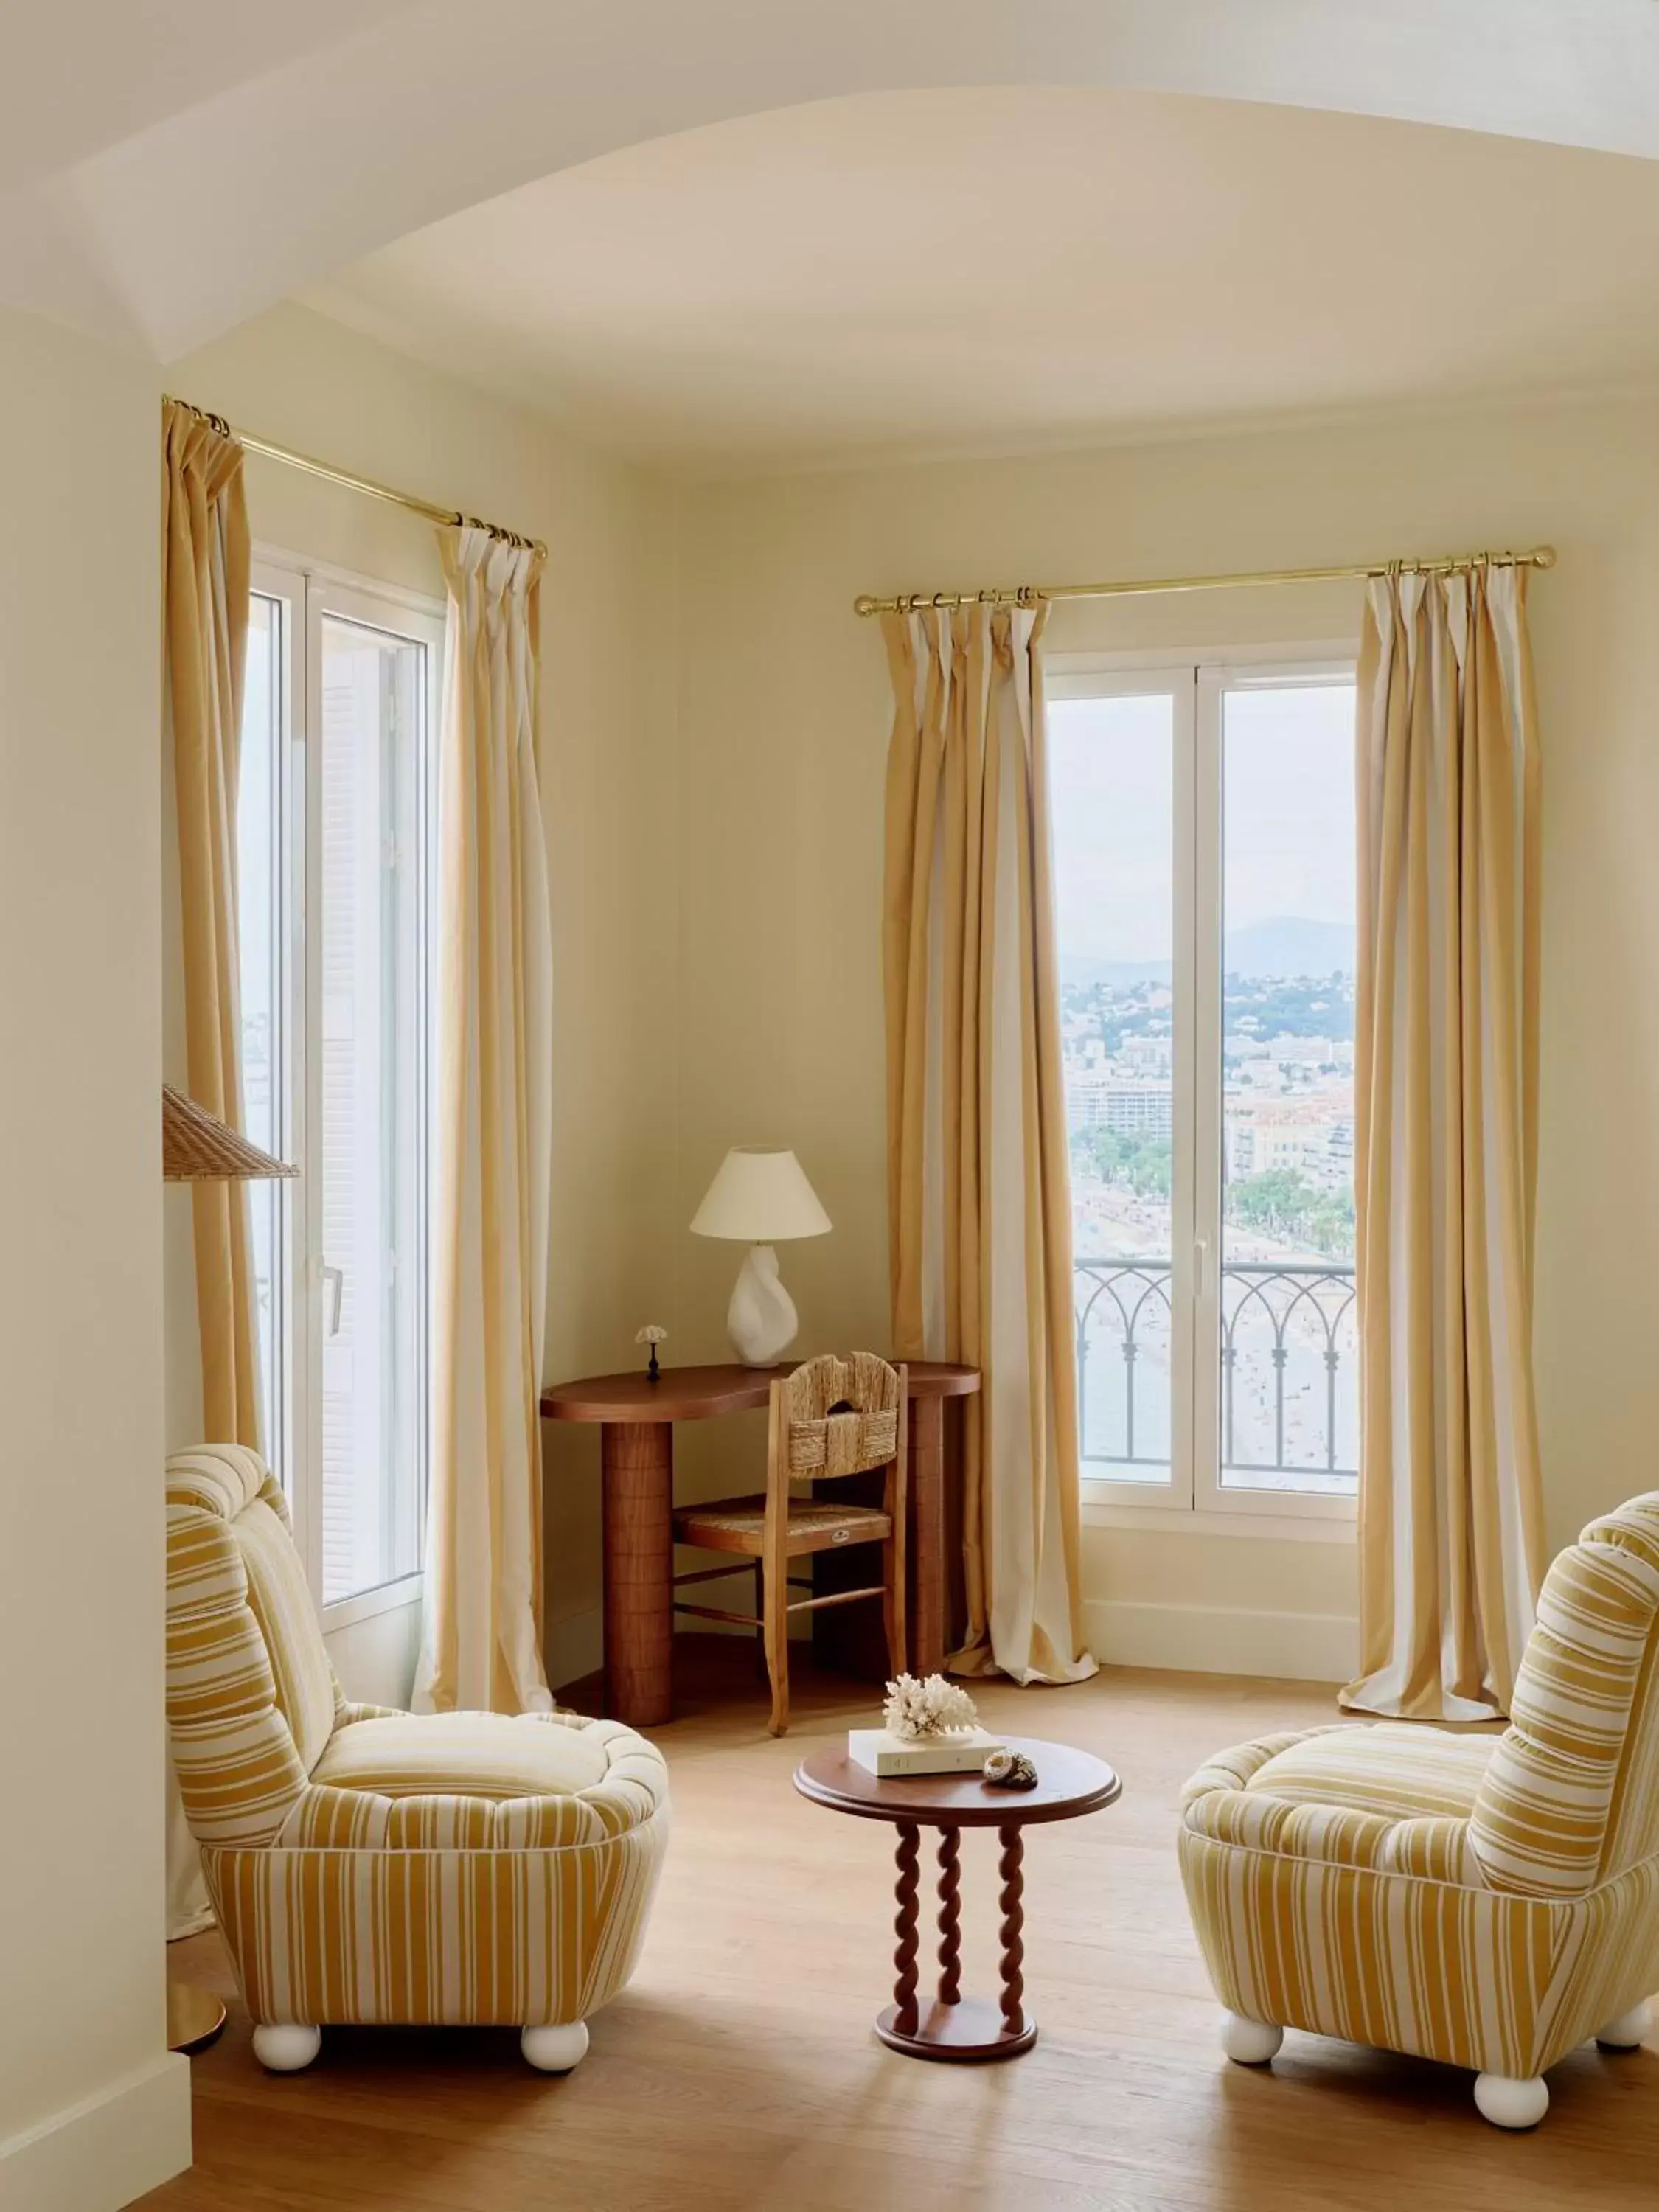 View (from property/room), Seating Area in Hôtel La Pérouse Nice Baie des Anges - Recently fully renovated